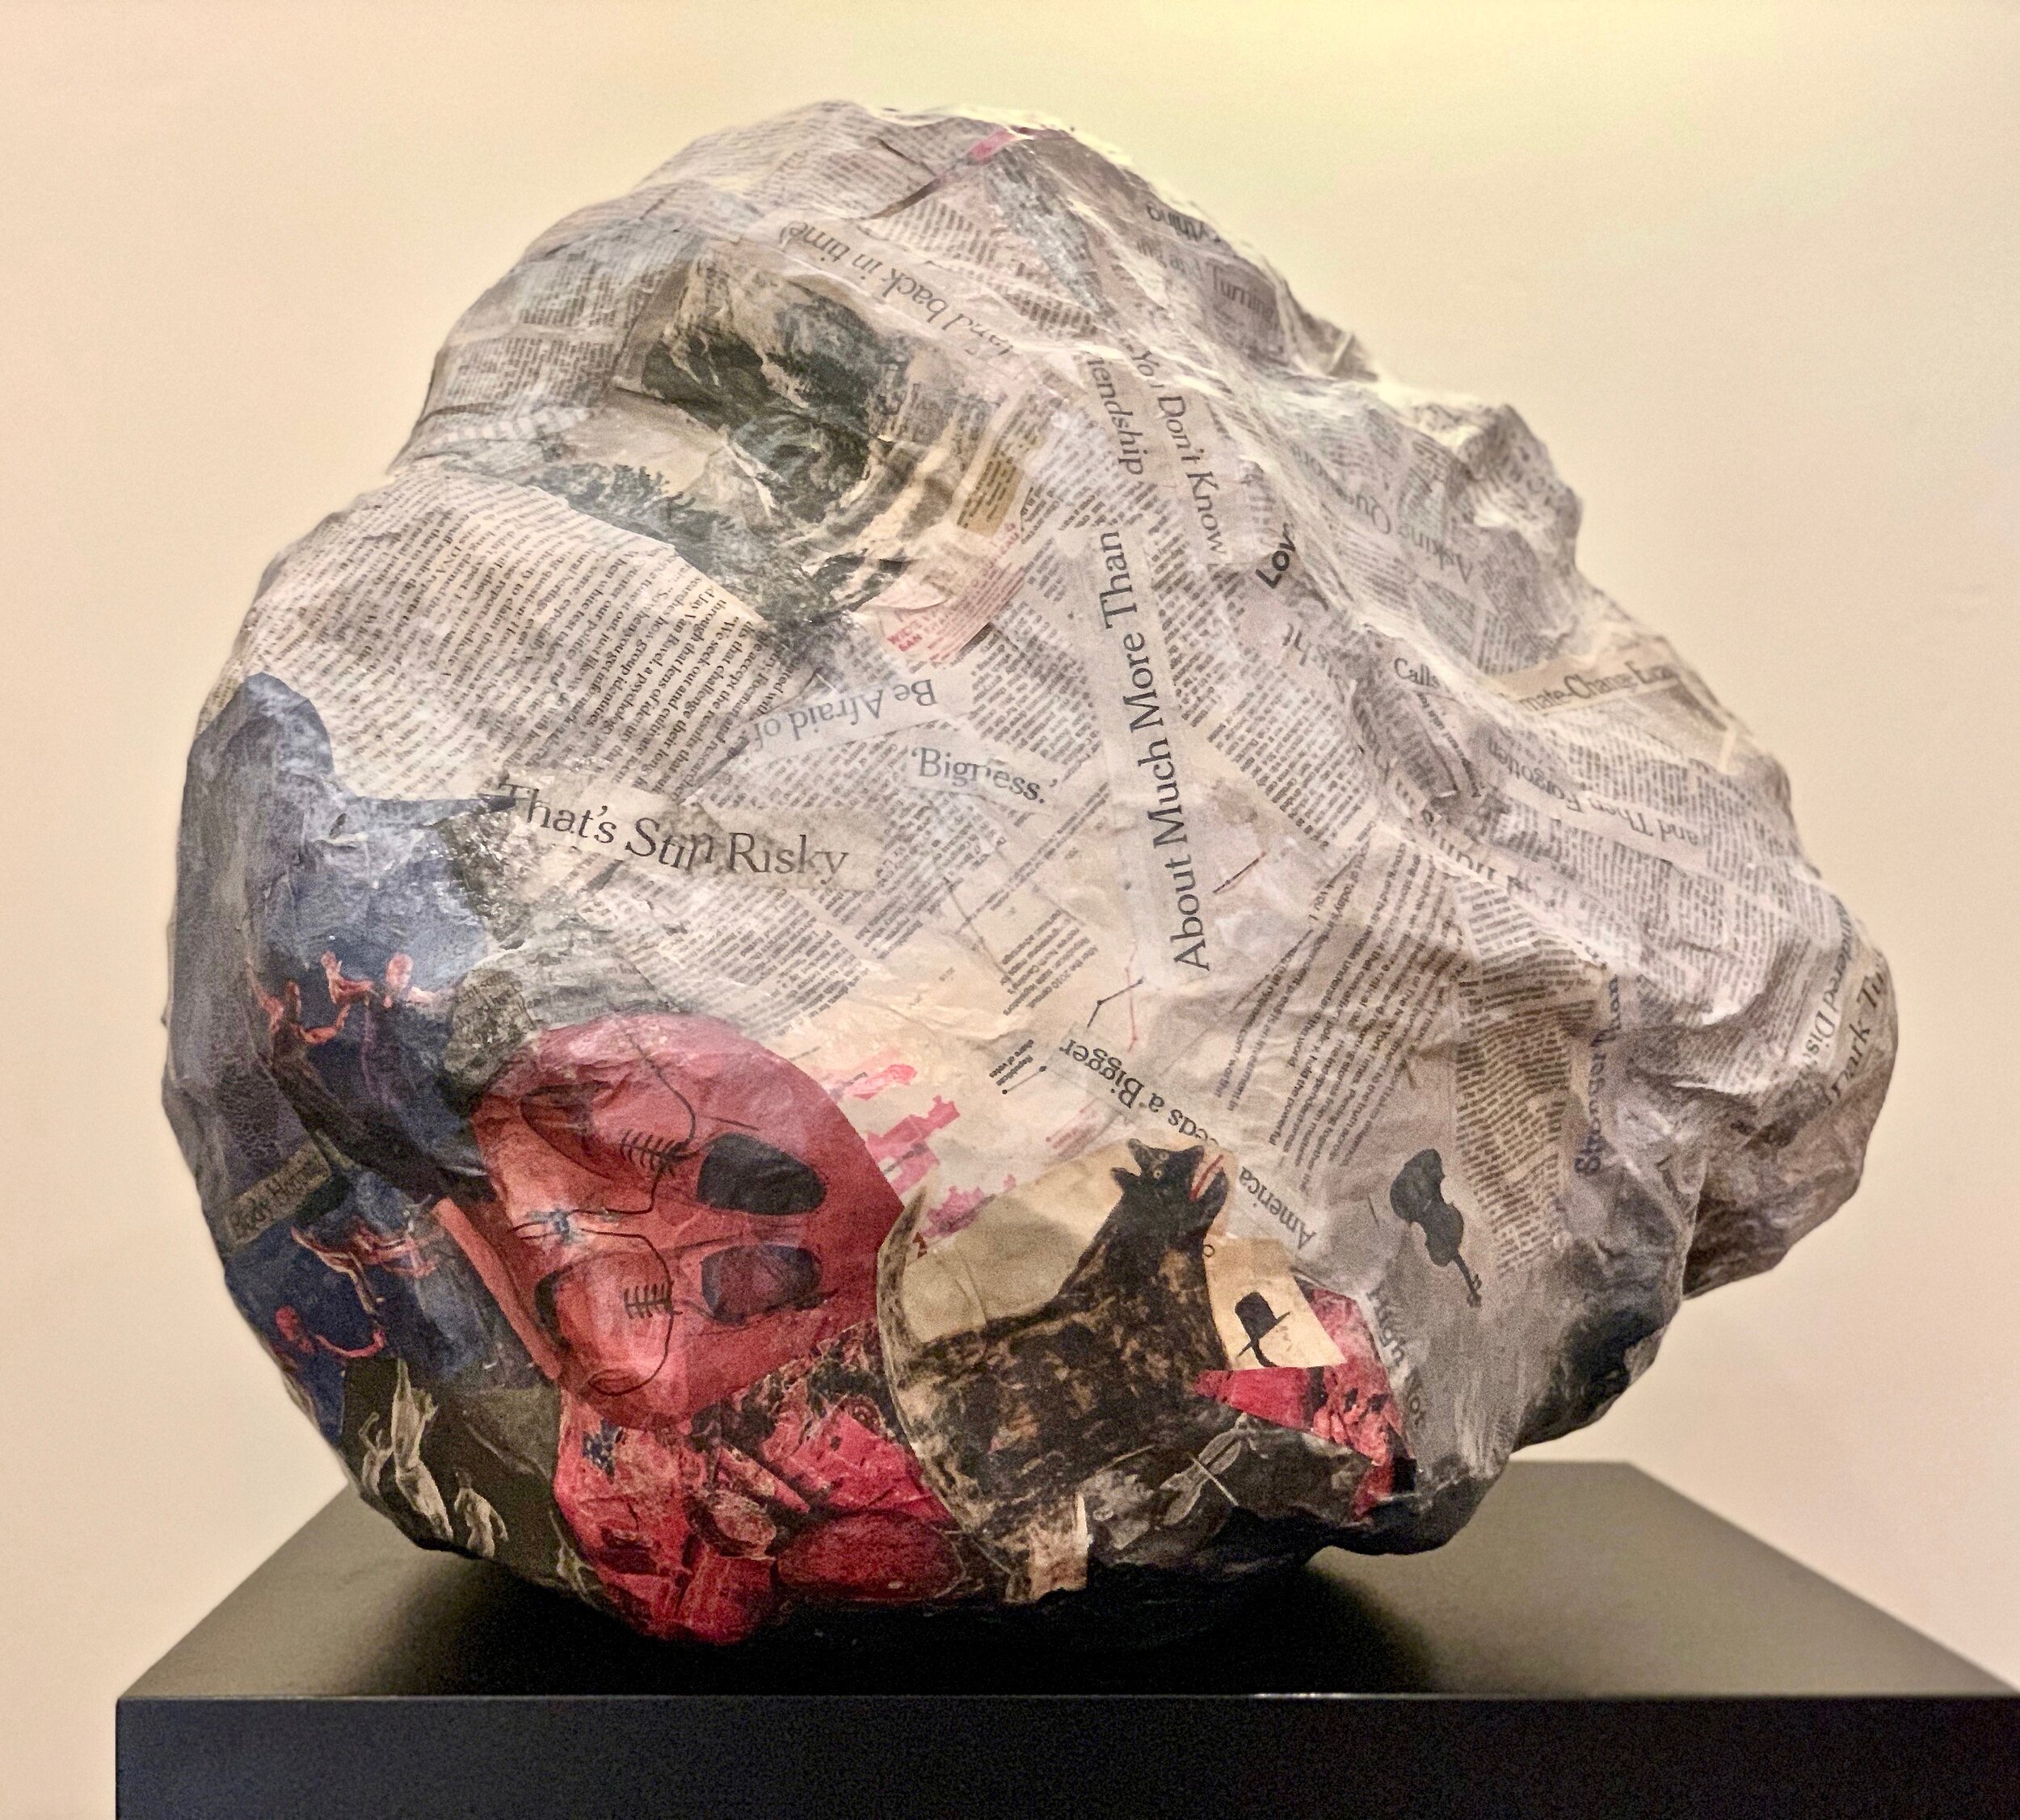  Fragment, 2019 19h x 28 x 26 inches Irregularly shaped sculpture made of wire, plaster, newspaper clippings, glue, acrylic paint 